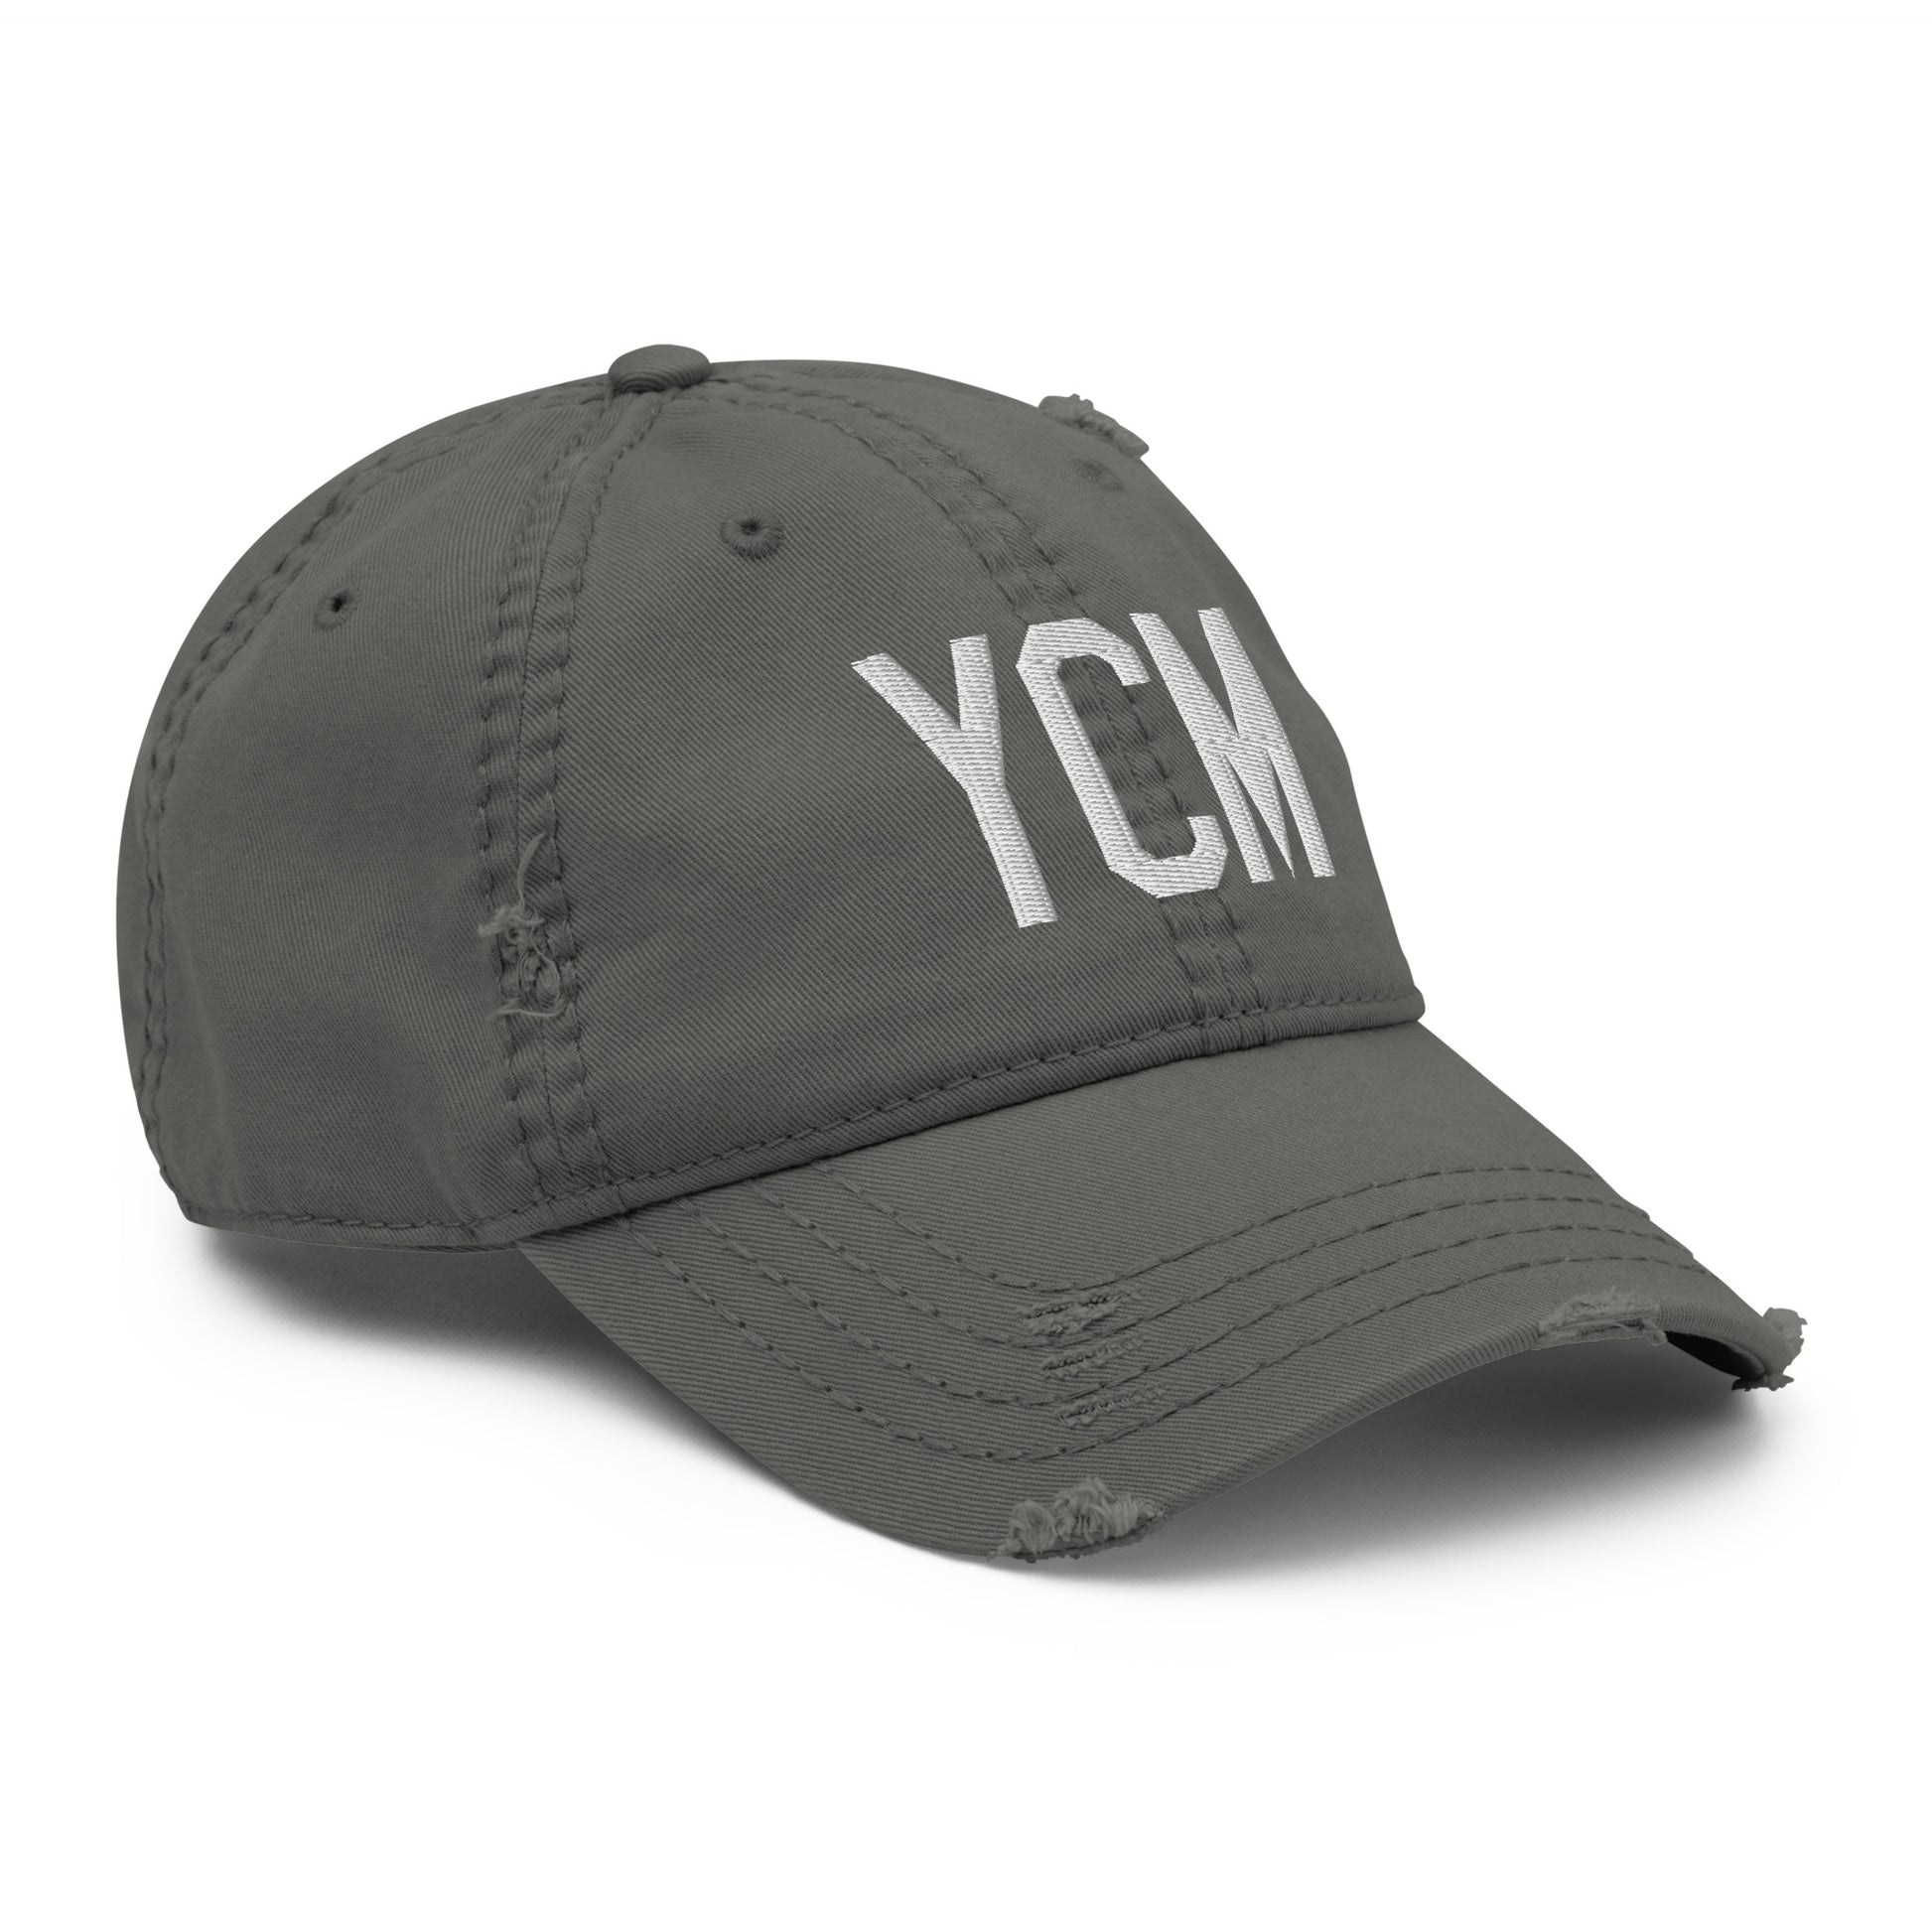 Airport Code Distressed Hat - White • YCM St. Catharines • YHM Designs - Image 17